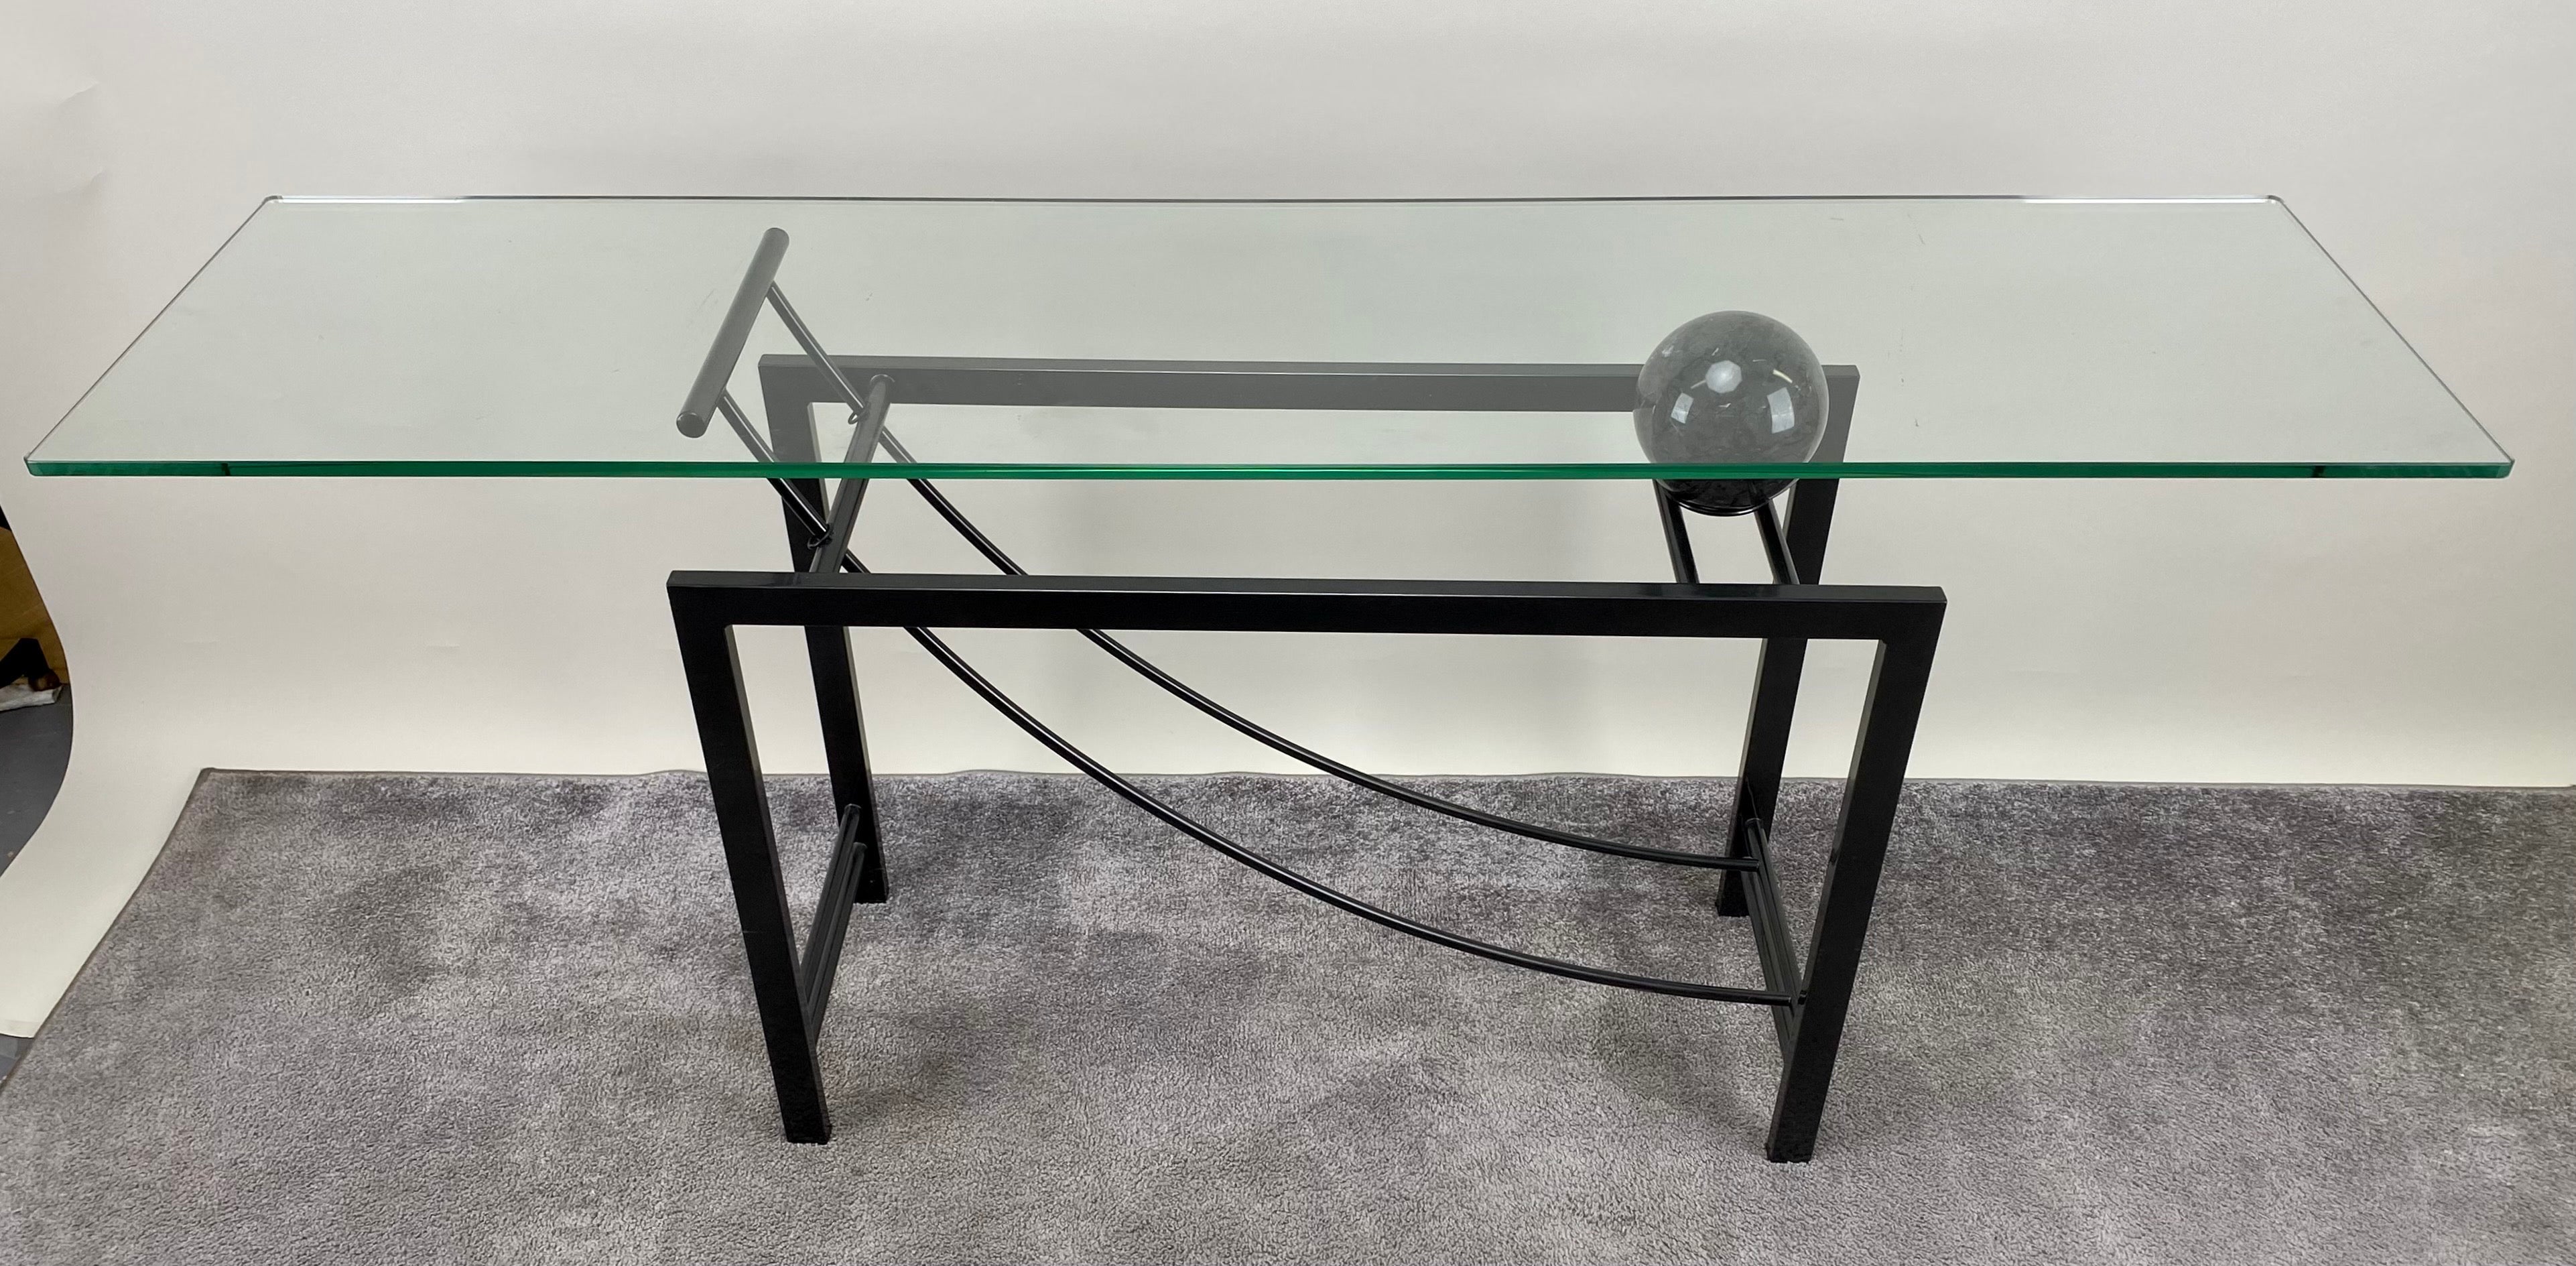 
Introducing an exquisite minimalist console, a fusion of geometric elegance and sleek sophistication. Crafted from black metal, its clean lines form a striking structure crowned with a rectangular glass top. A defining feature of this console is a